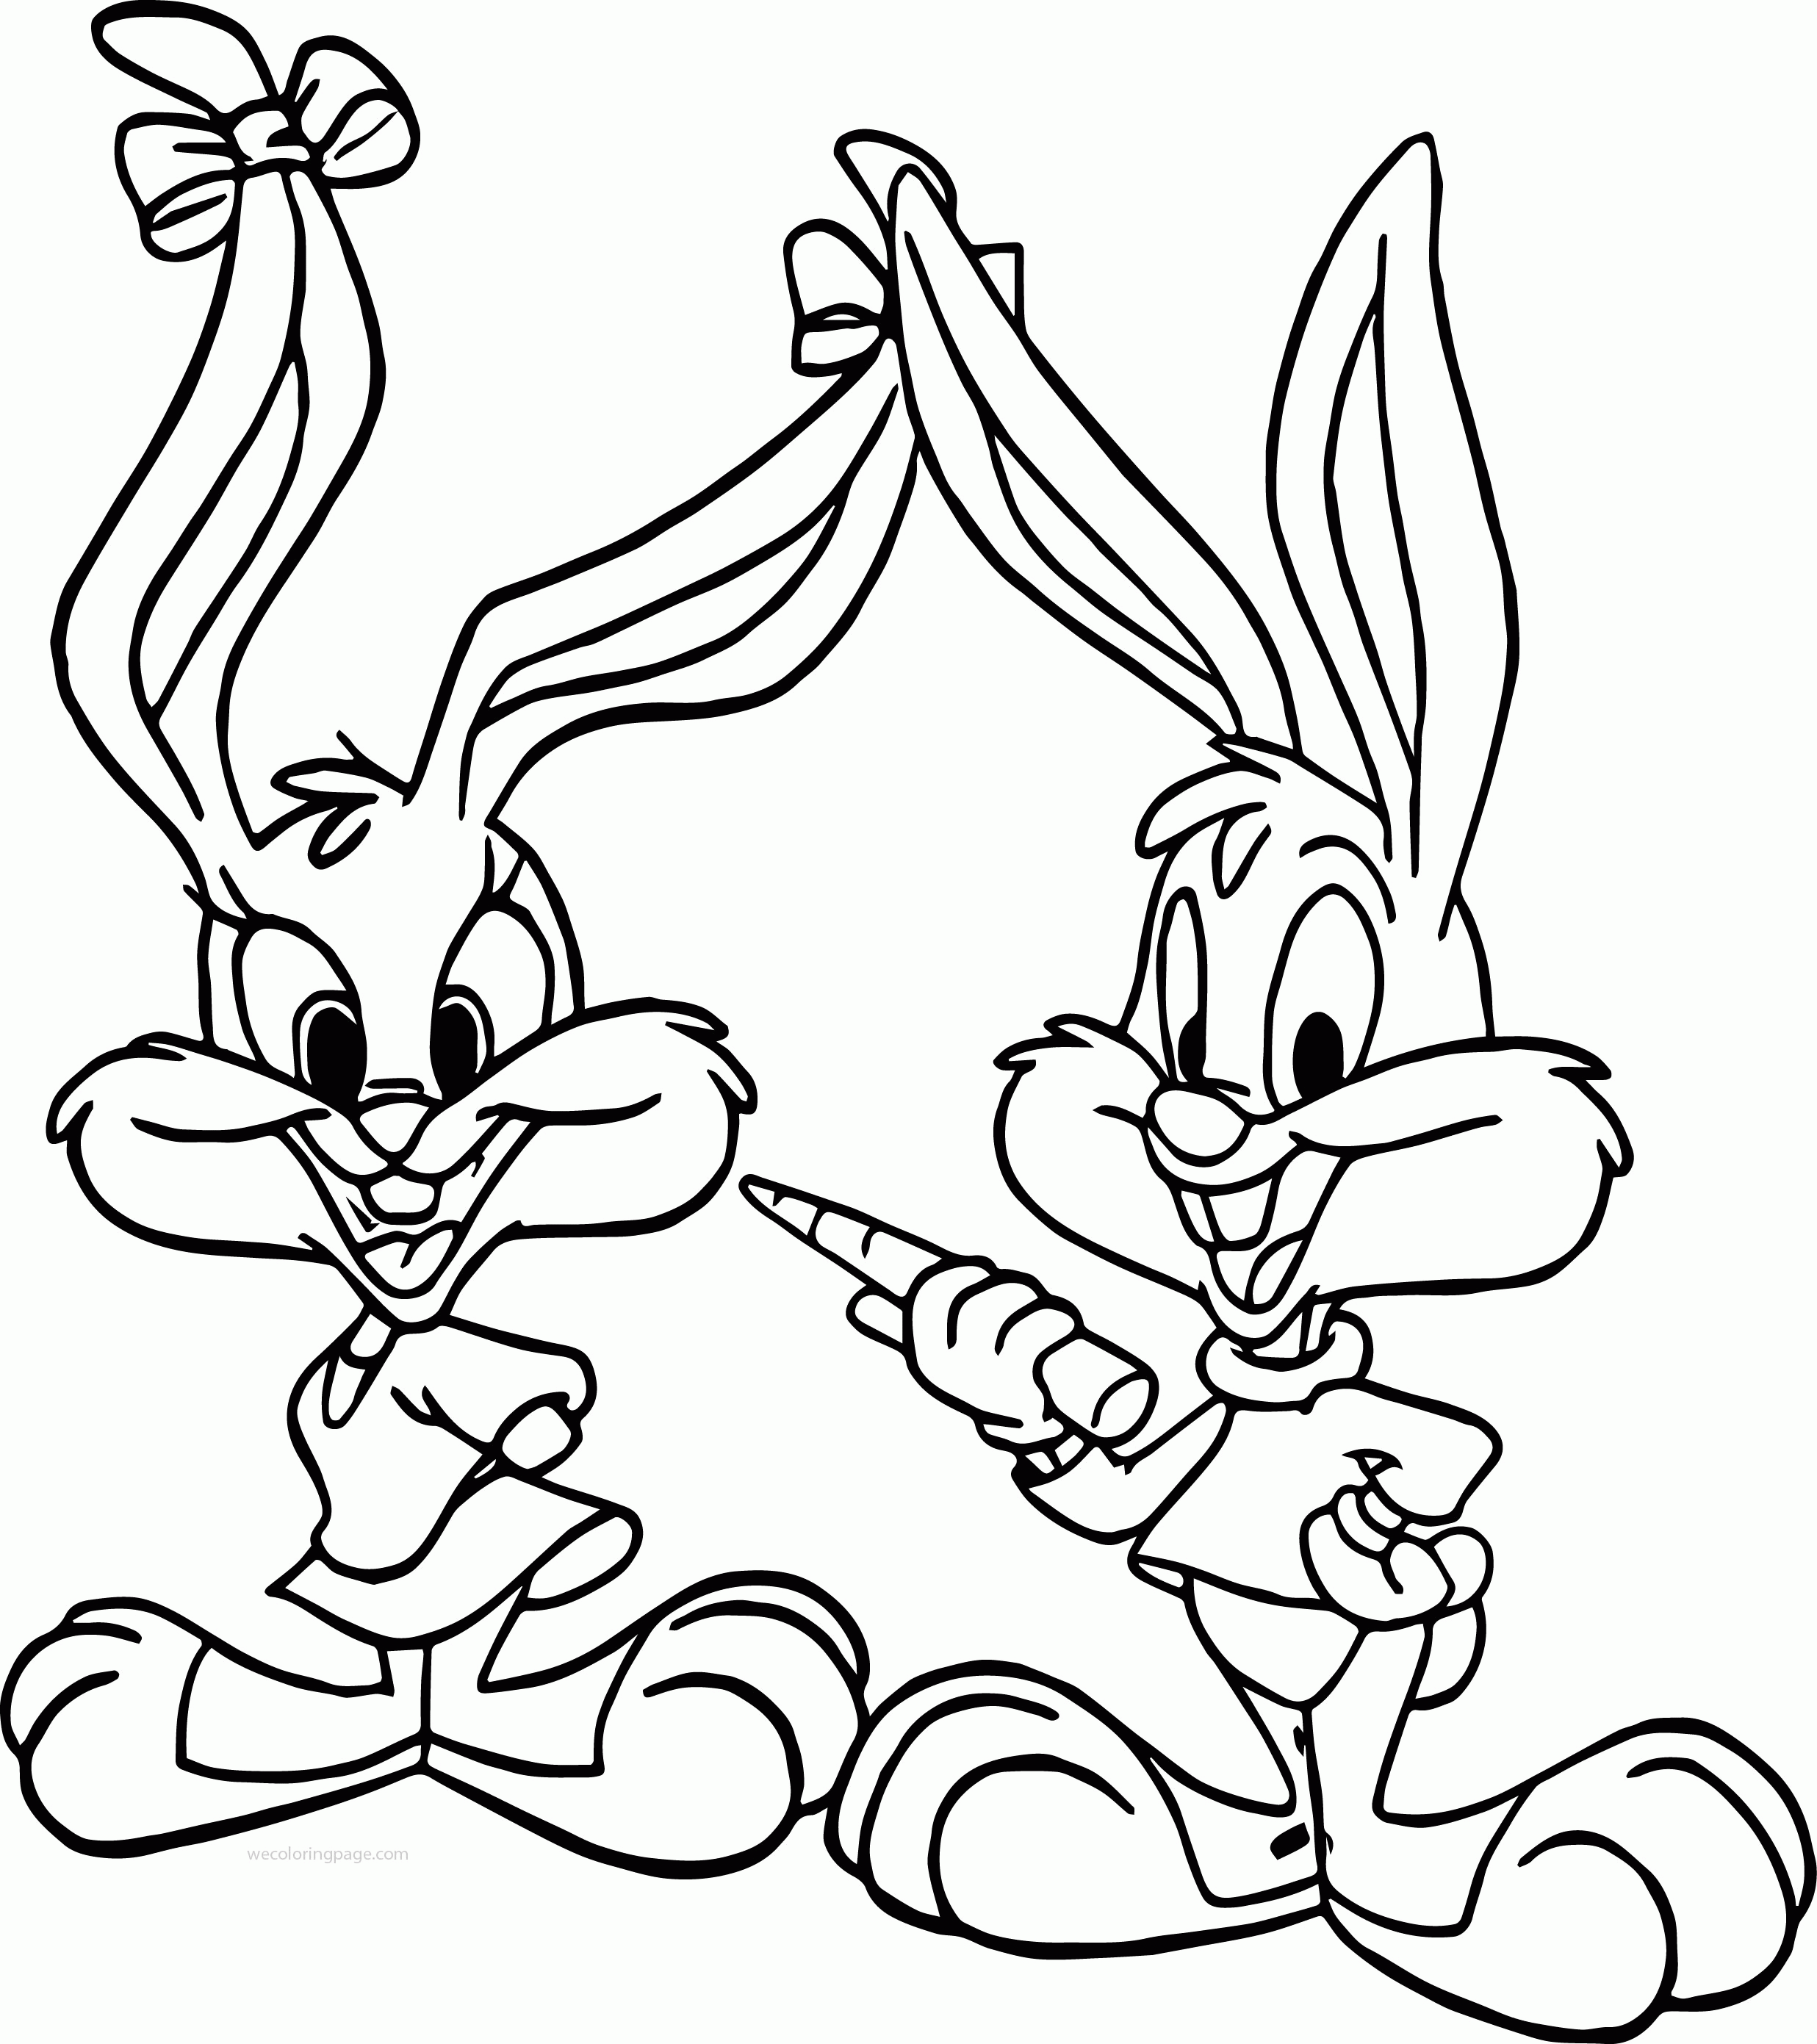 Baby Bugs Bunny And Lola Coloring Pages | Wecoloringpage